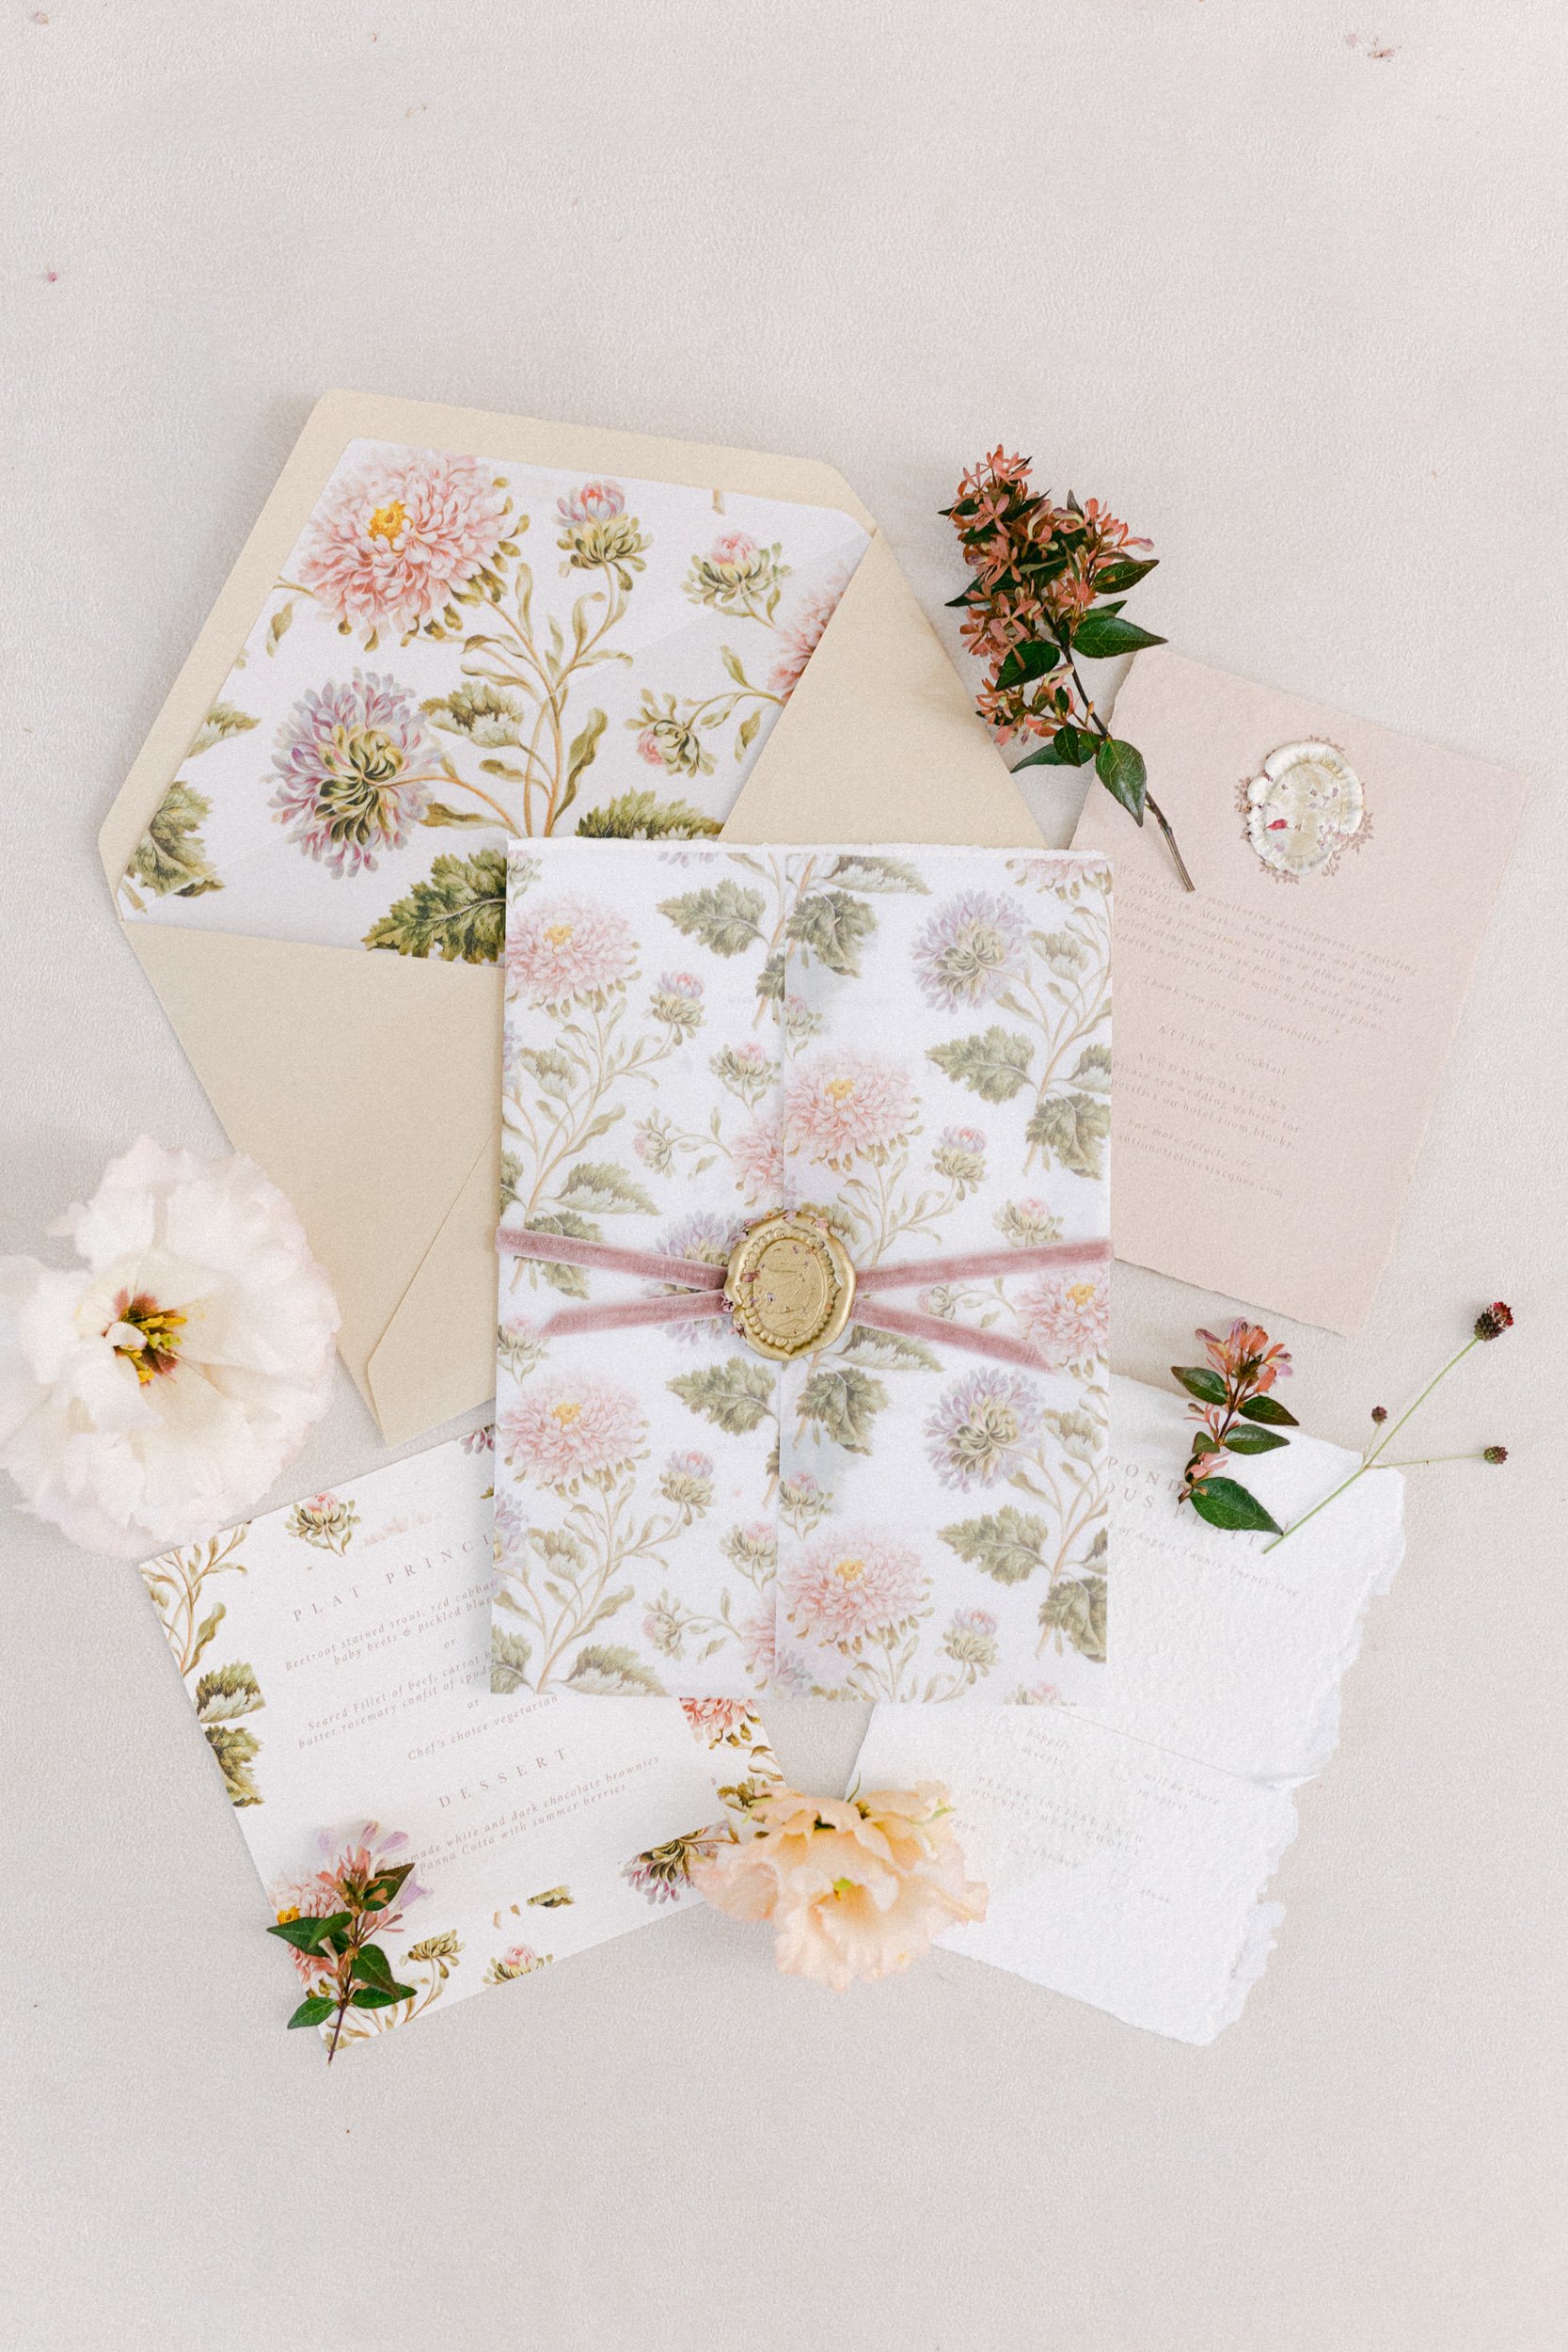 Elegant, floral wedding stationery, specially designed for a bespoke, intimate wedding at Chateau de Courtomer